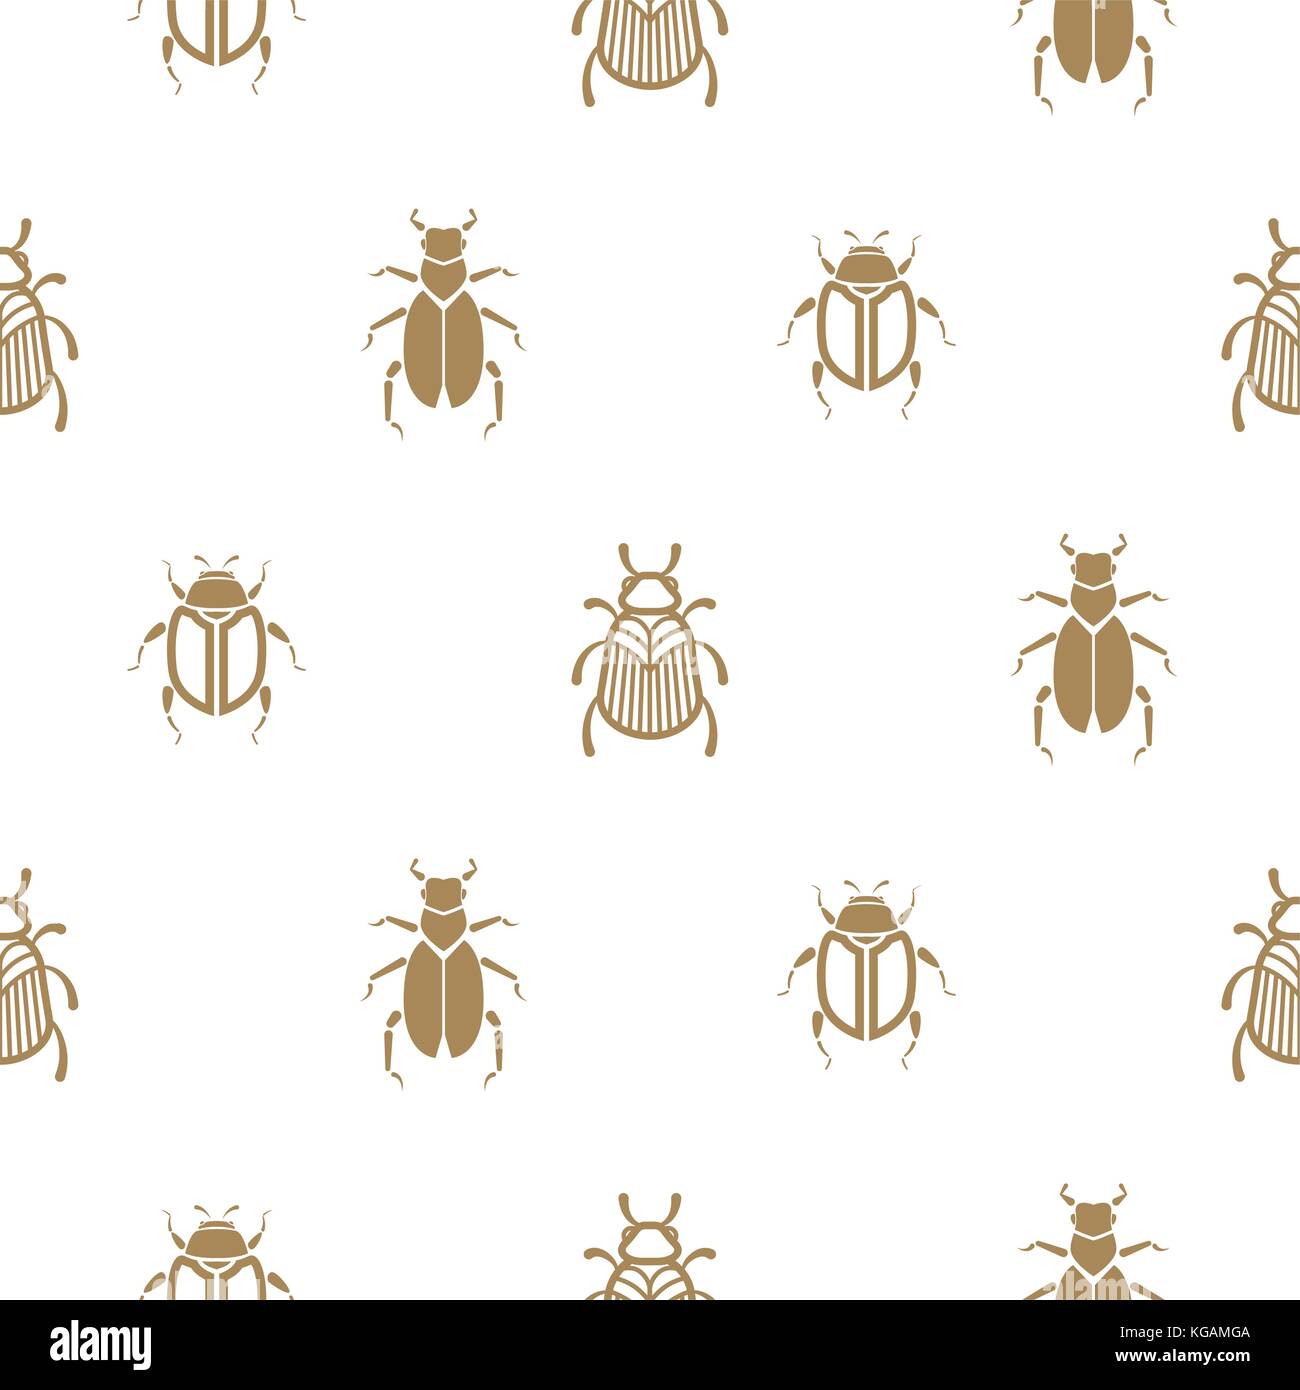 Beetle gold and white vector seamless pattern for print. Stock Vector